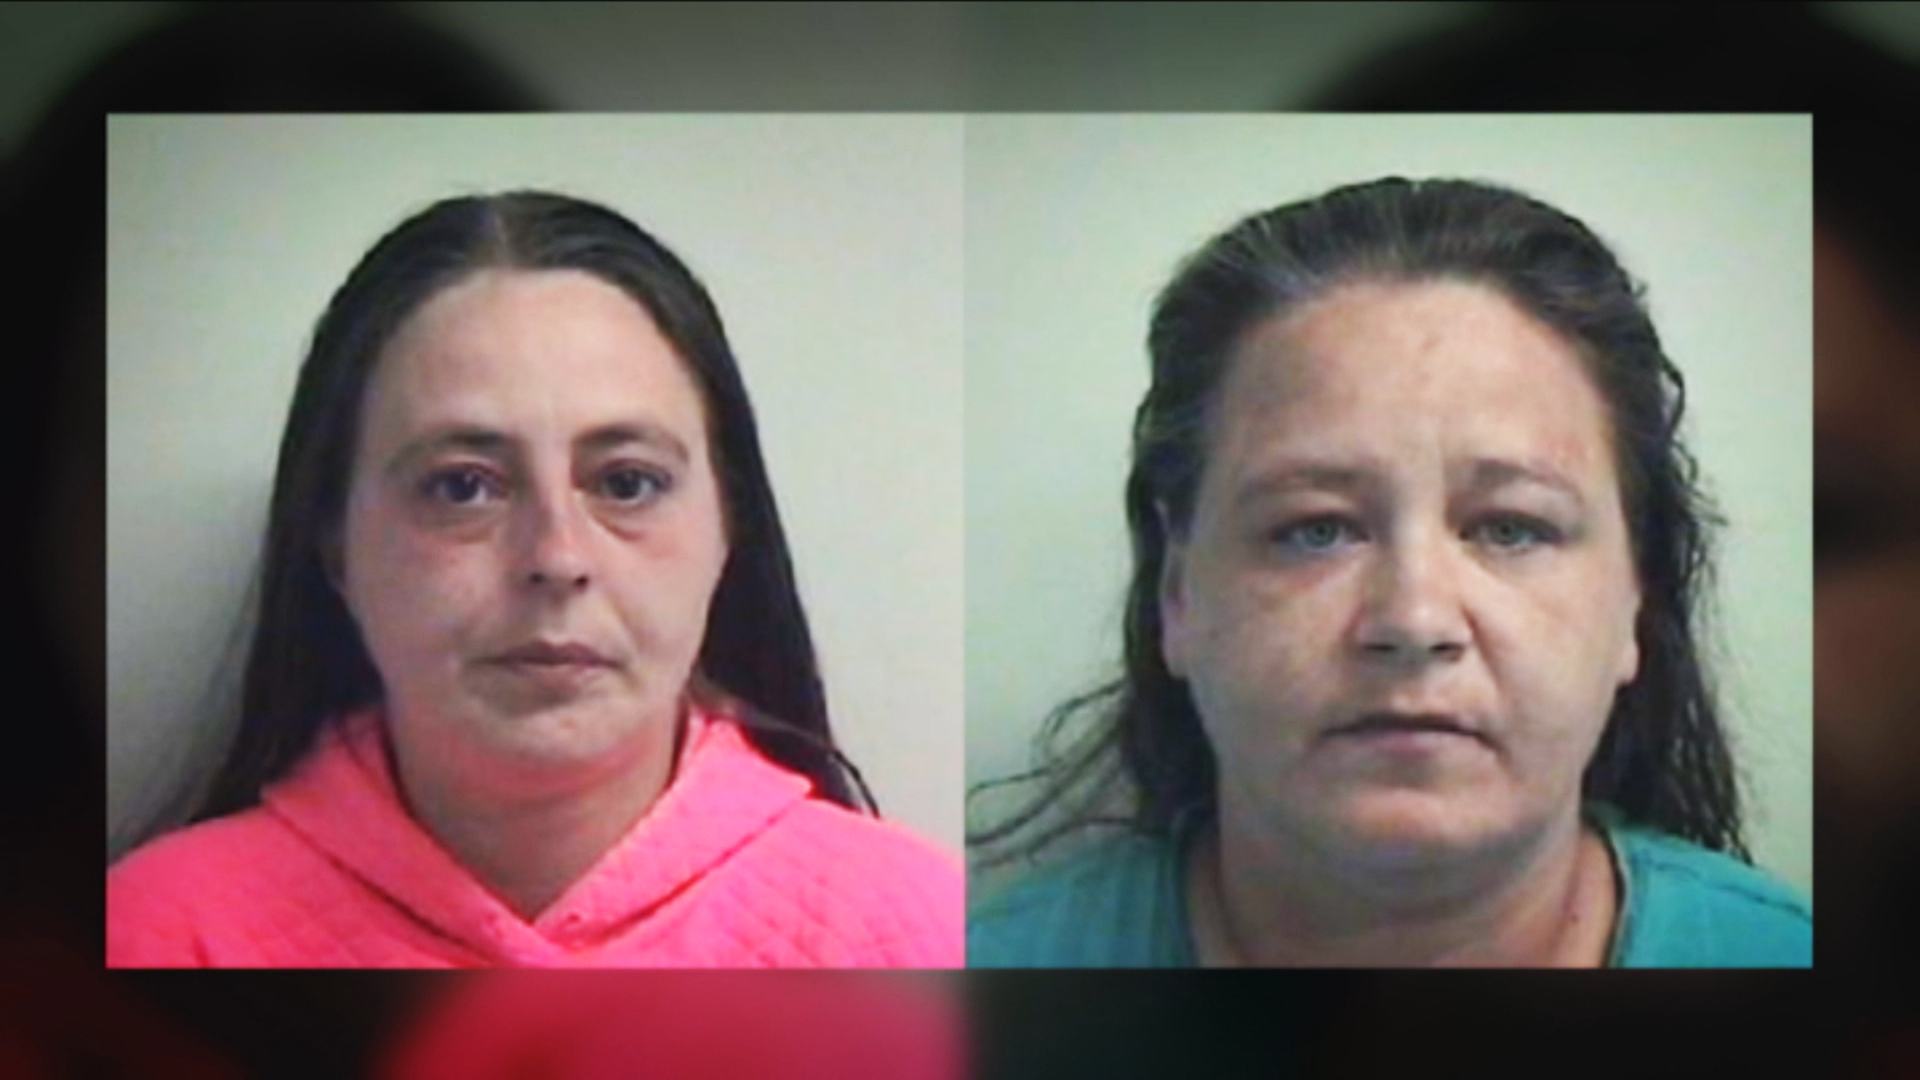 Parents Margaret Wade, 41, and Marie Sweeney, 40, were jailed in 2019 for six years and four months each.